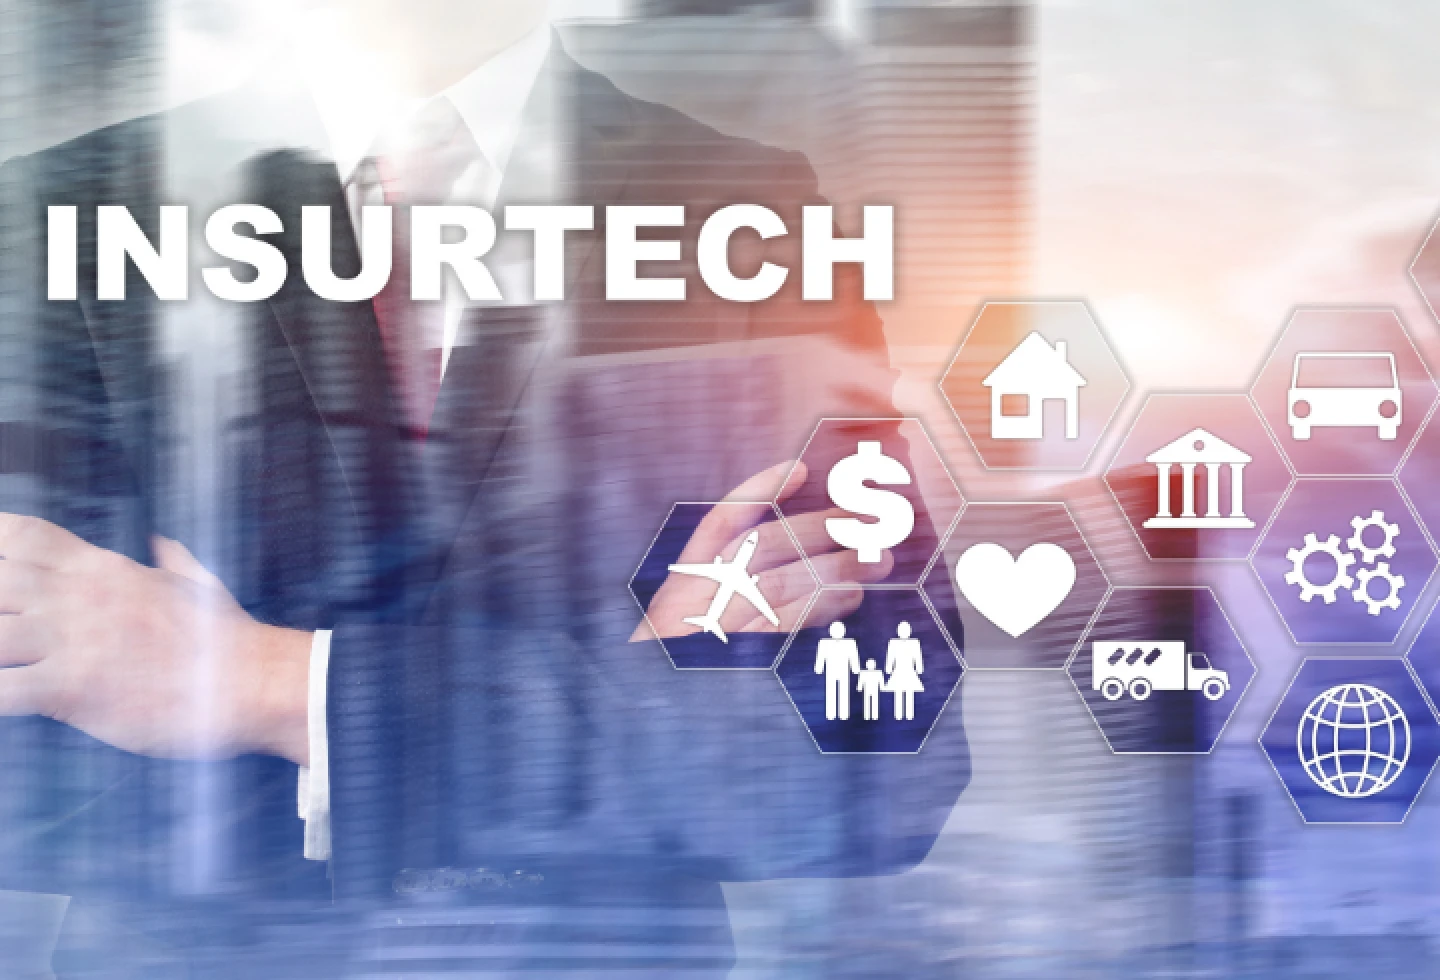 Insurtech: Modernizing Finance through Cooperation and Dynamic Innovation